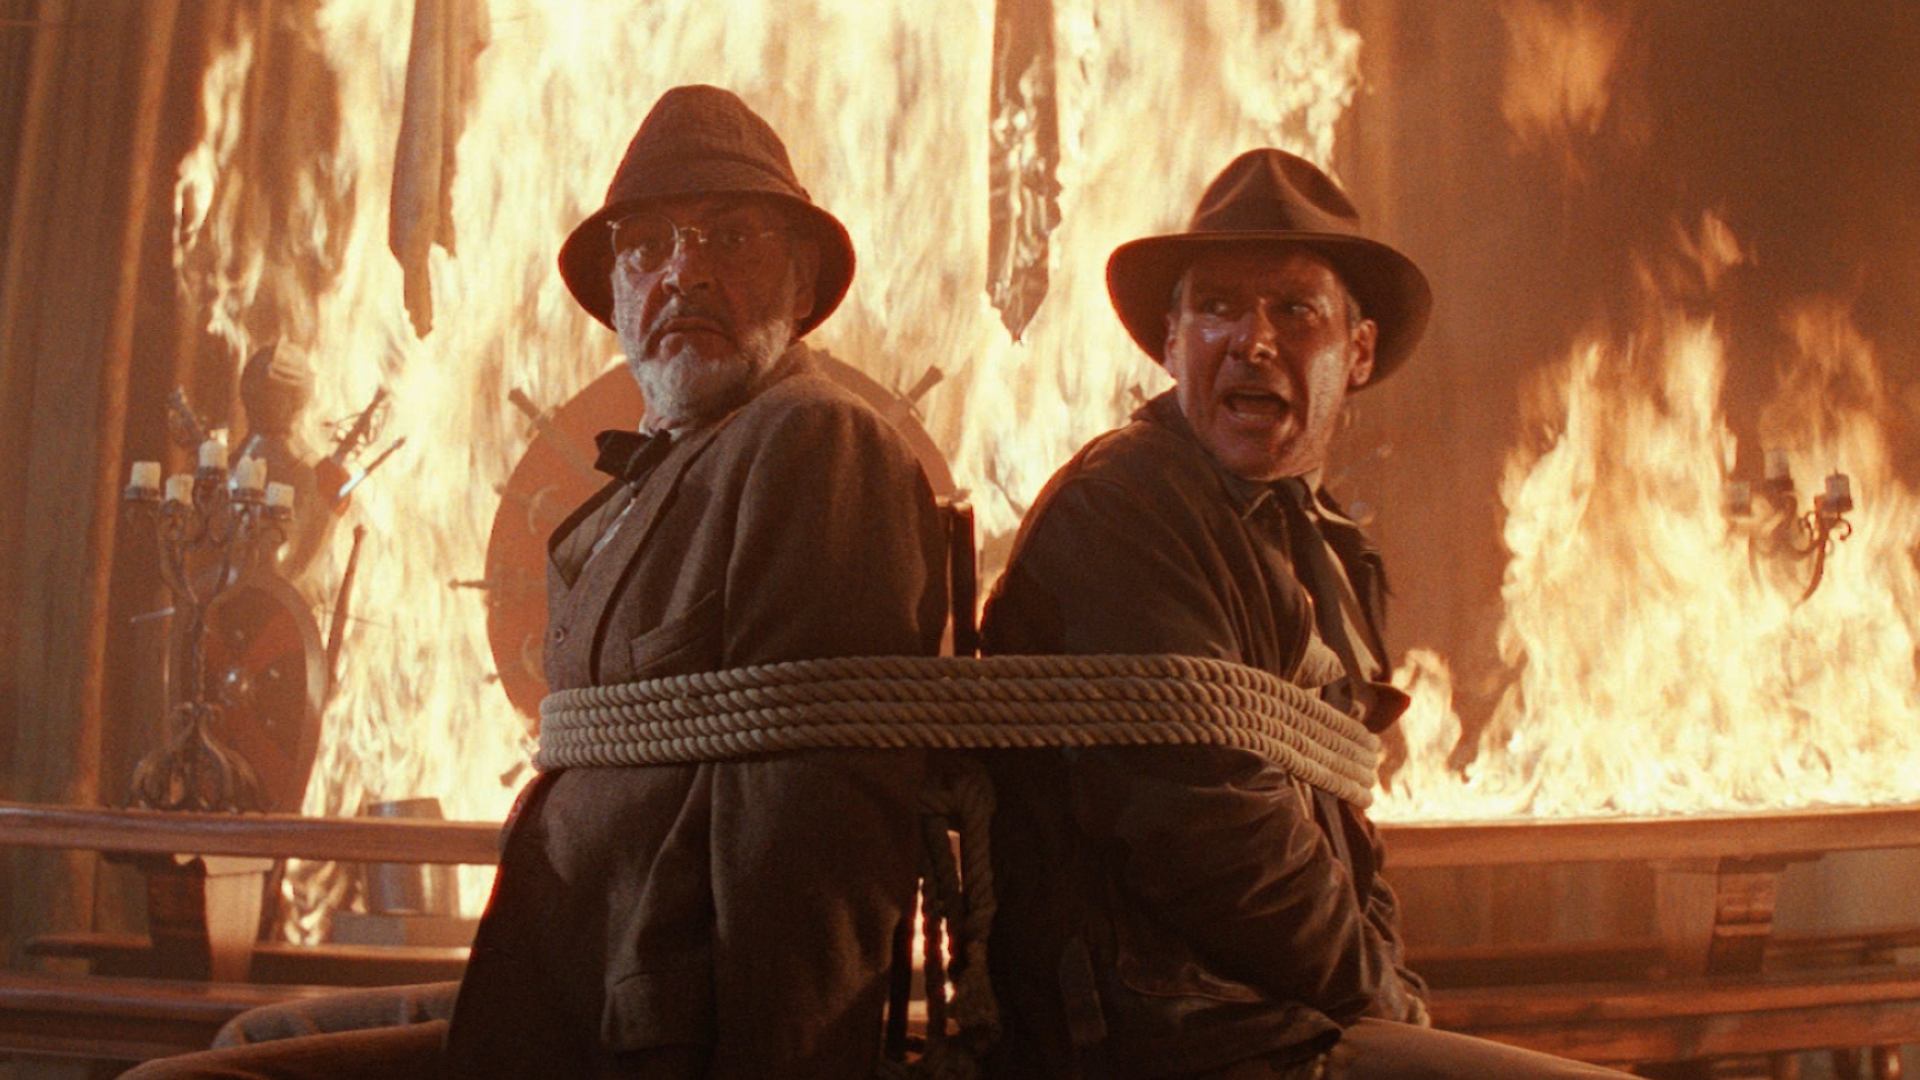 Harrison Ford (Indiana Jones): Sean Connery as Henry Jones, Sr., Indiana's father, The Last Crusade. 1920x1080 Full HD Wallpaper.